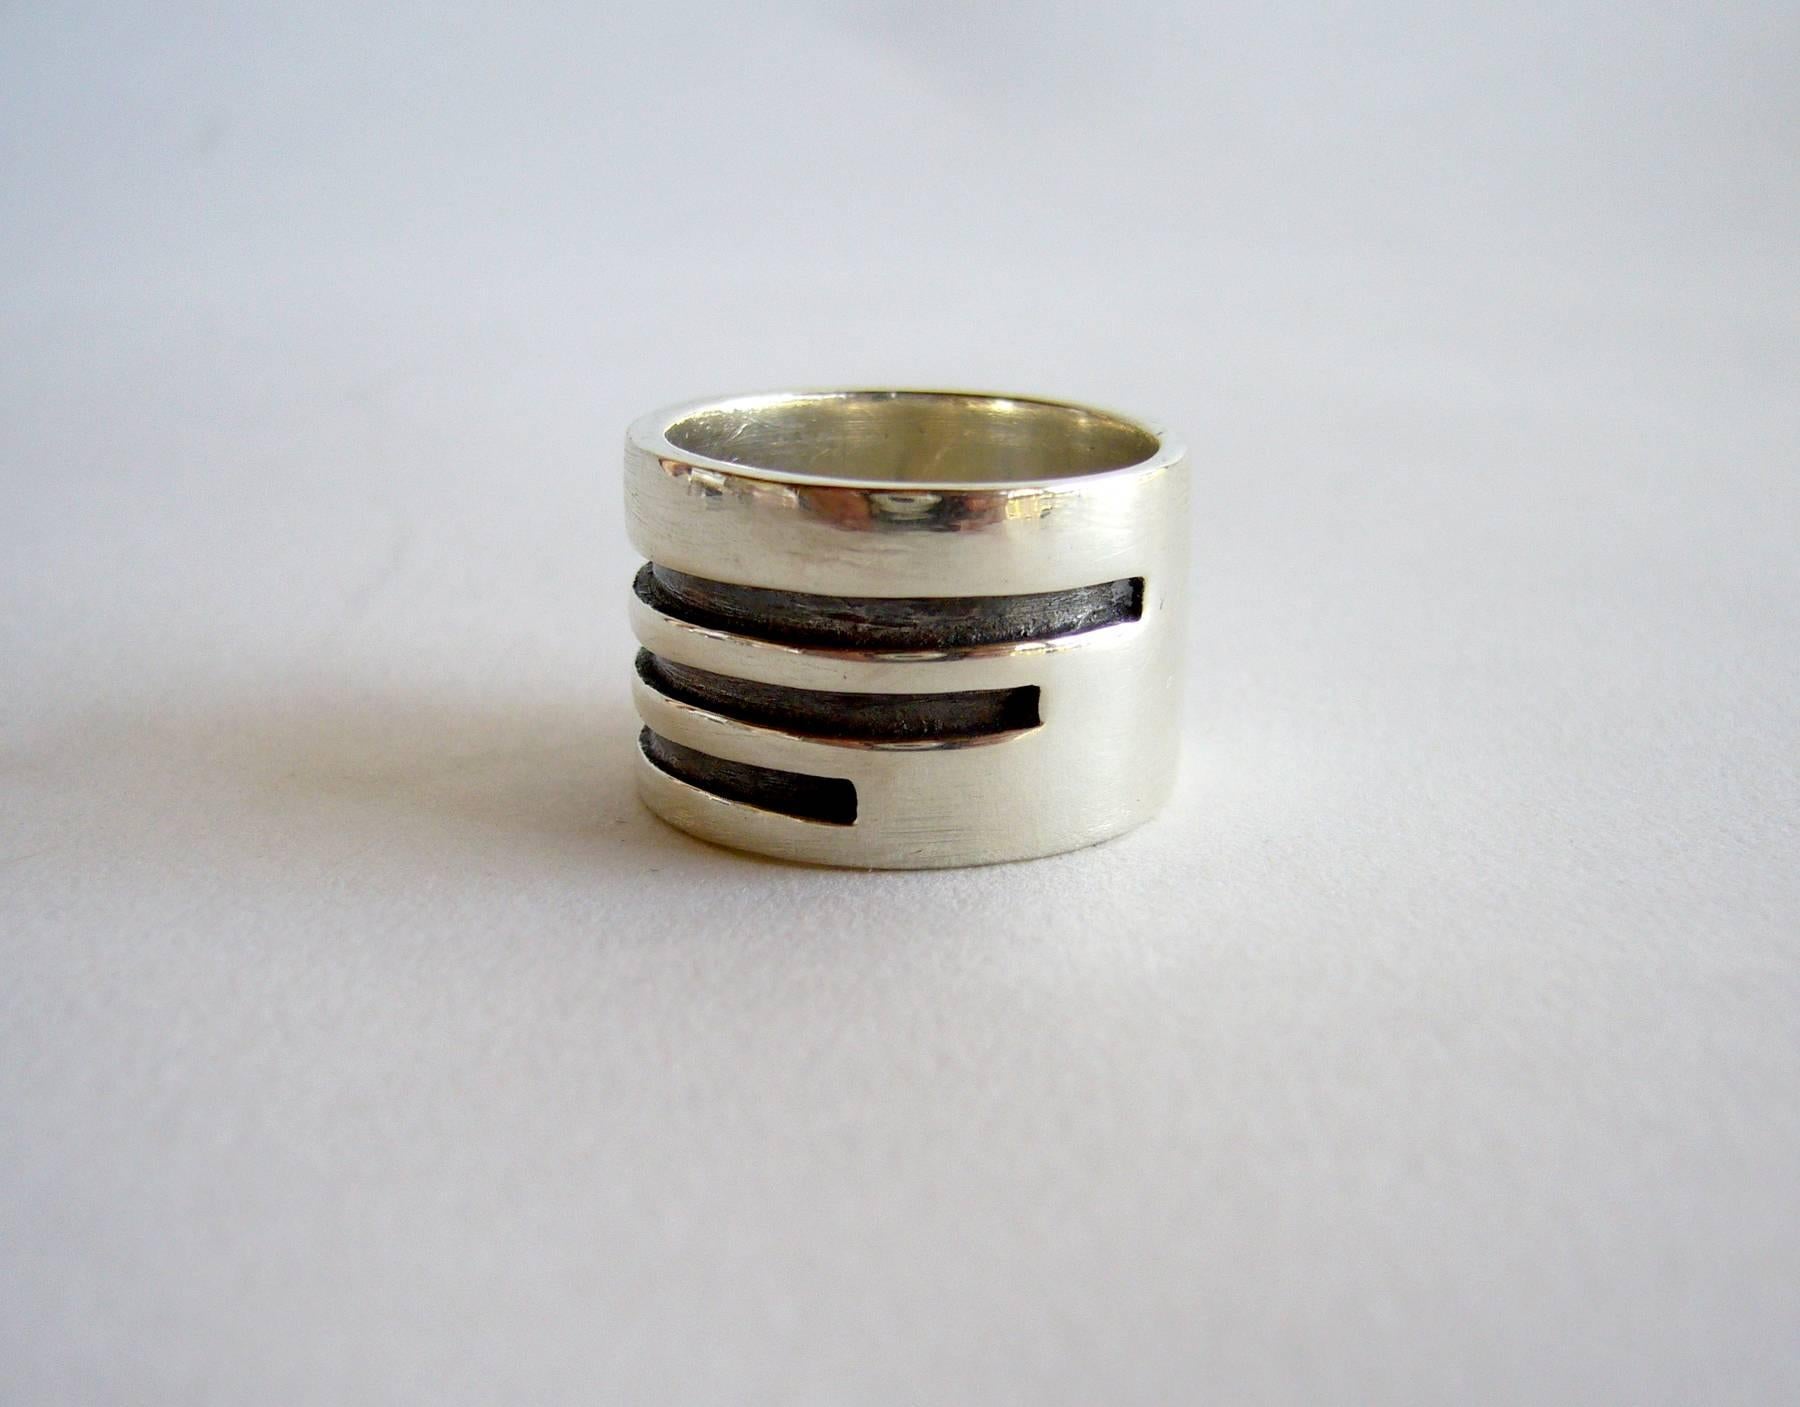 Sterling silver ring created by Idella La Vista of New York City, New York. Ring is a finger size 8.5 and suitable for a man or woman.  It measures 5/8